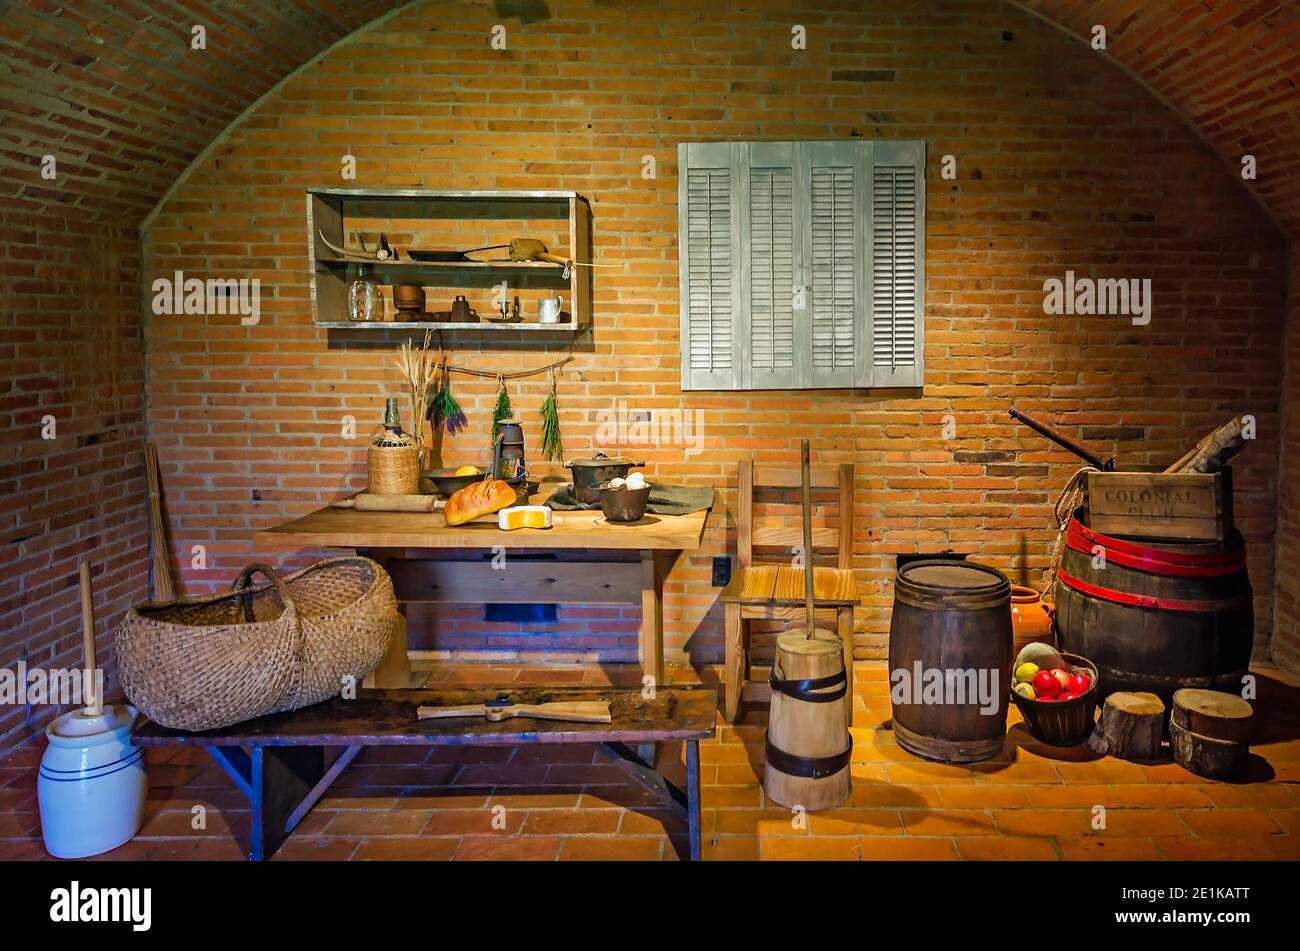 Typical Colonial kitchen items are set up in a room depicting daily life of Colonial settlers at the Fort of Colonial Mobile in Mobile, Alabama. Stock Photo